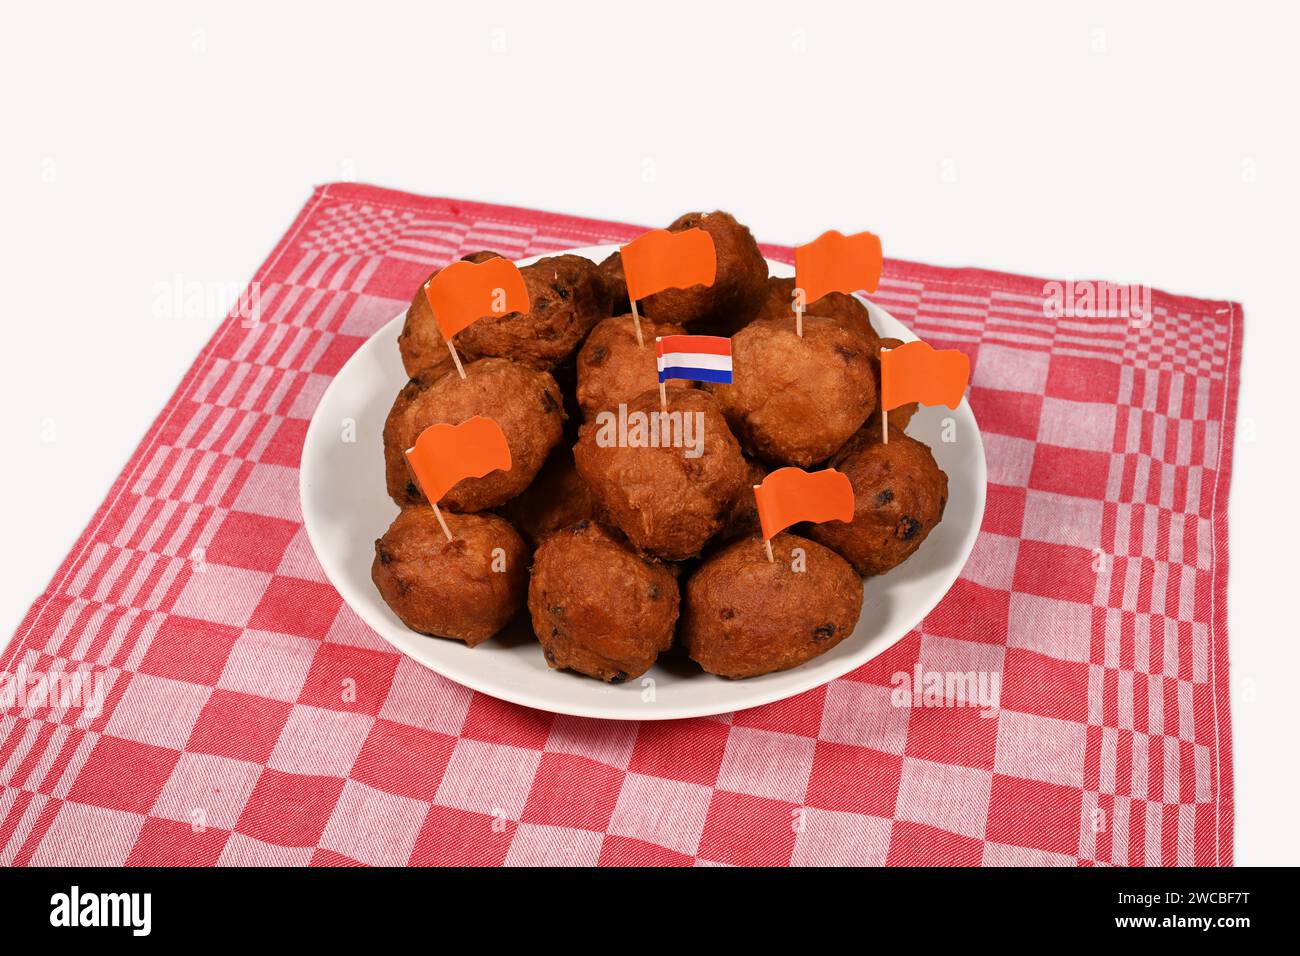 Oliebollen with Dutch flags Stock Photo